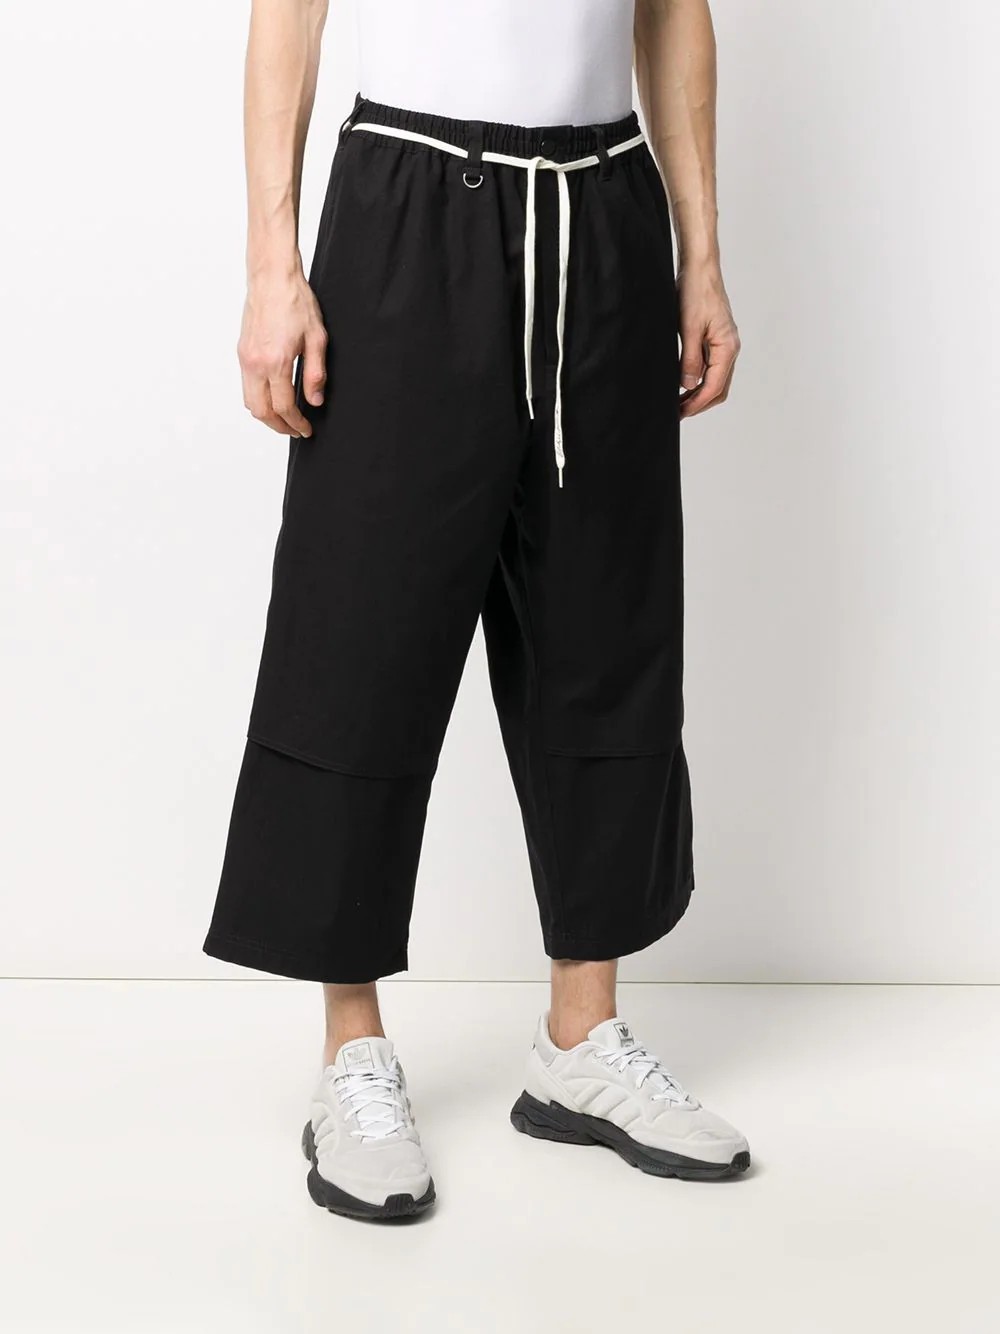 Canvas Workwear Cropped Pants FP8678 - 2